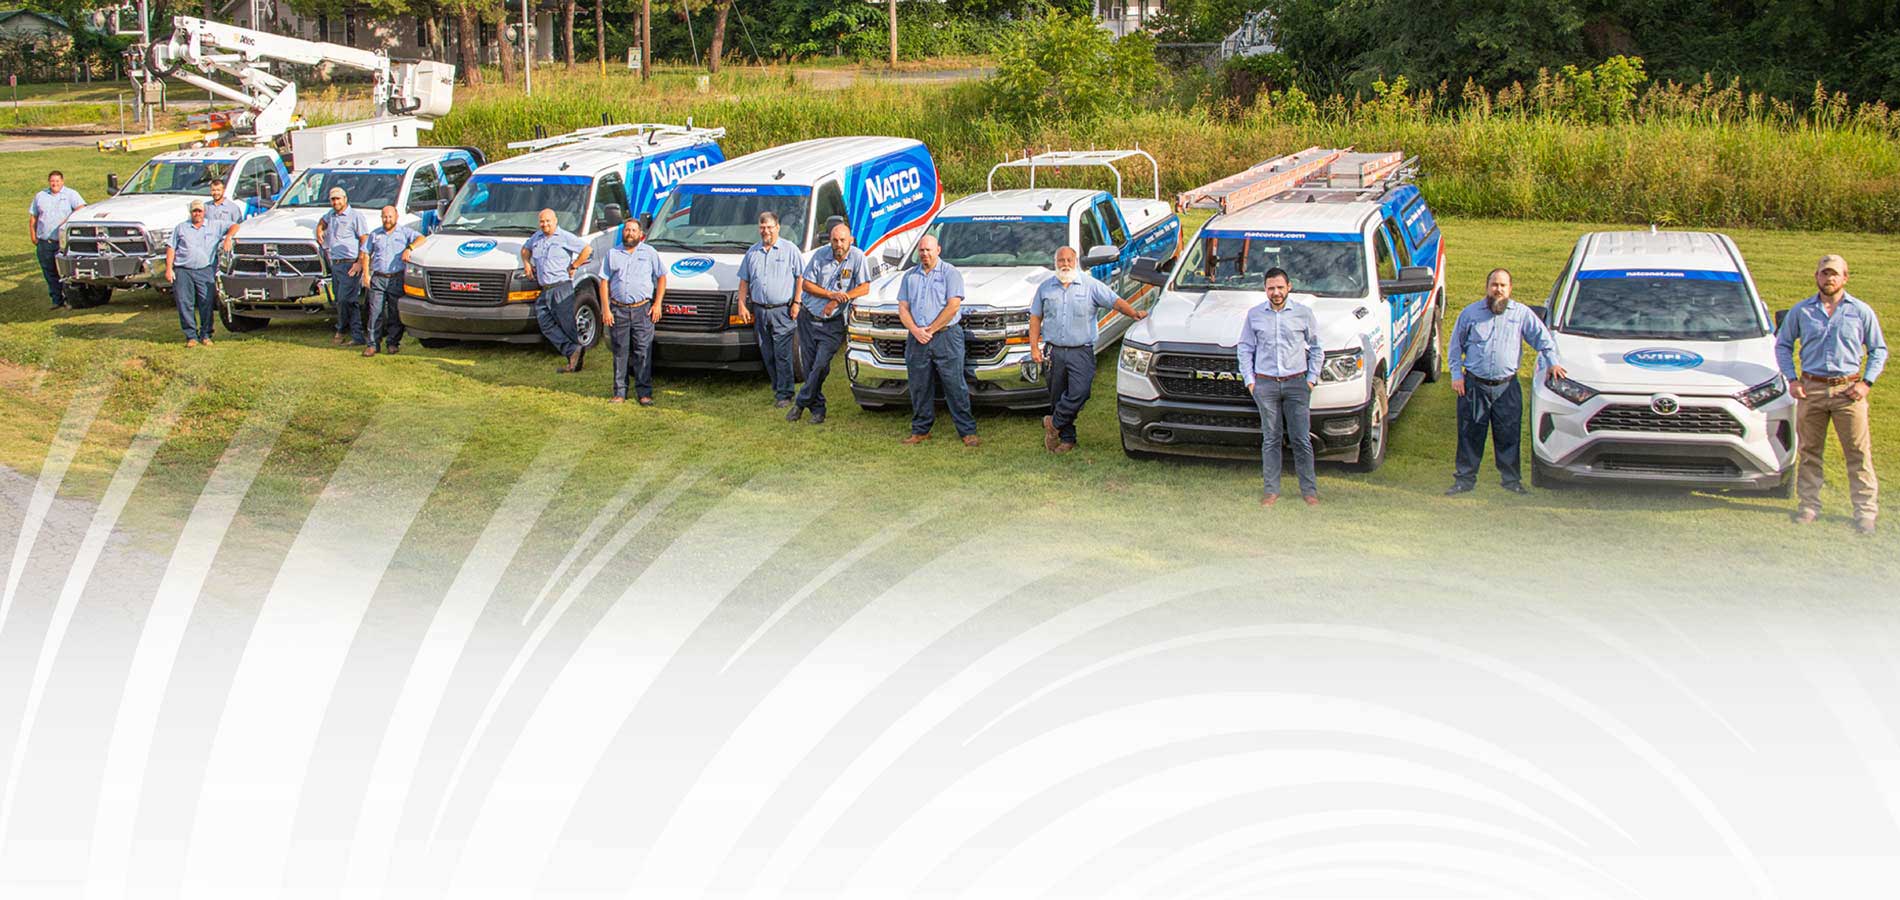 NATCO techs standing by services vehicles